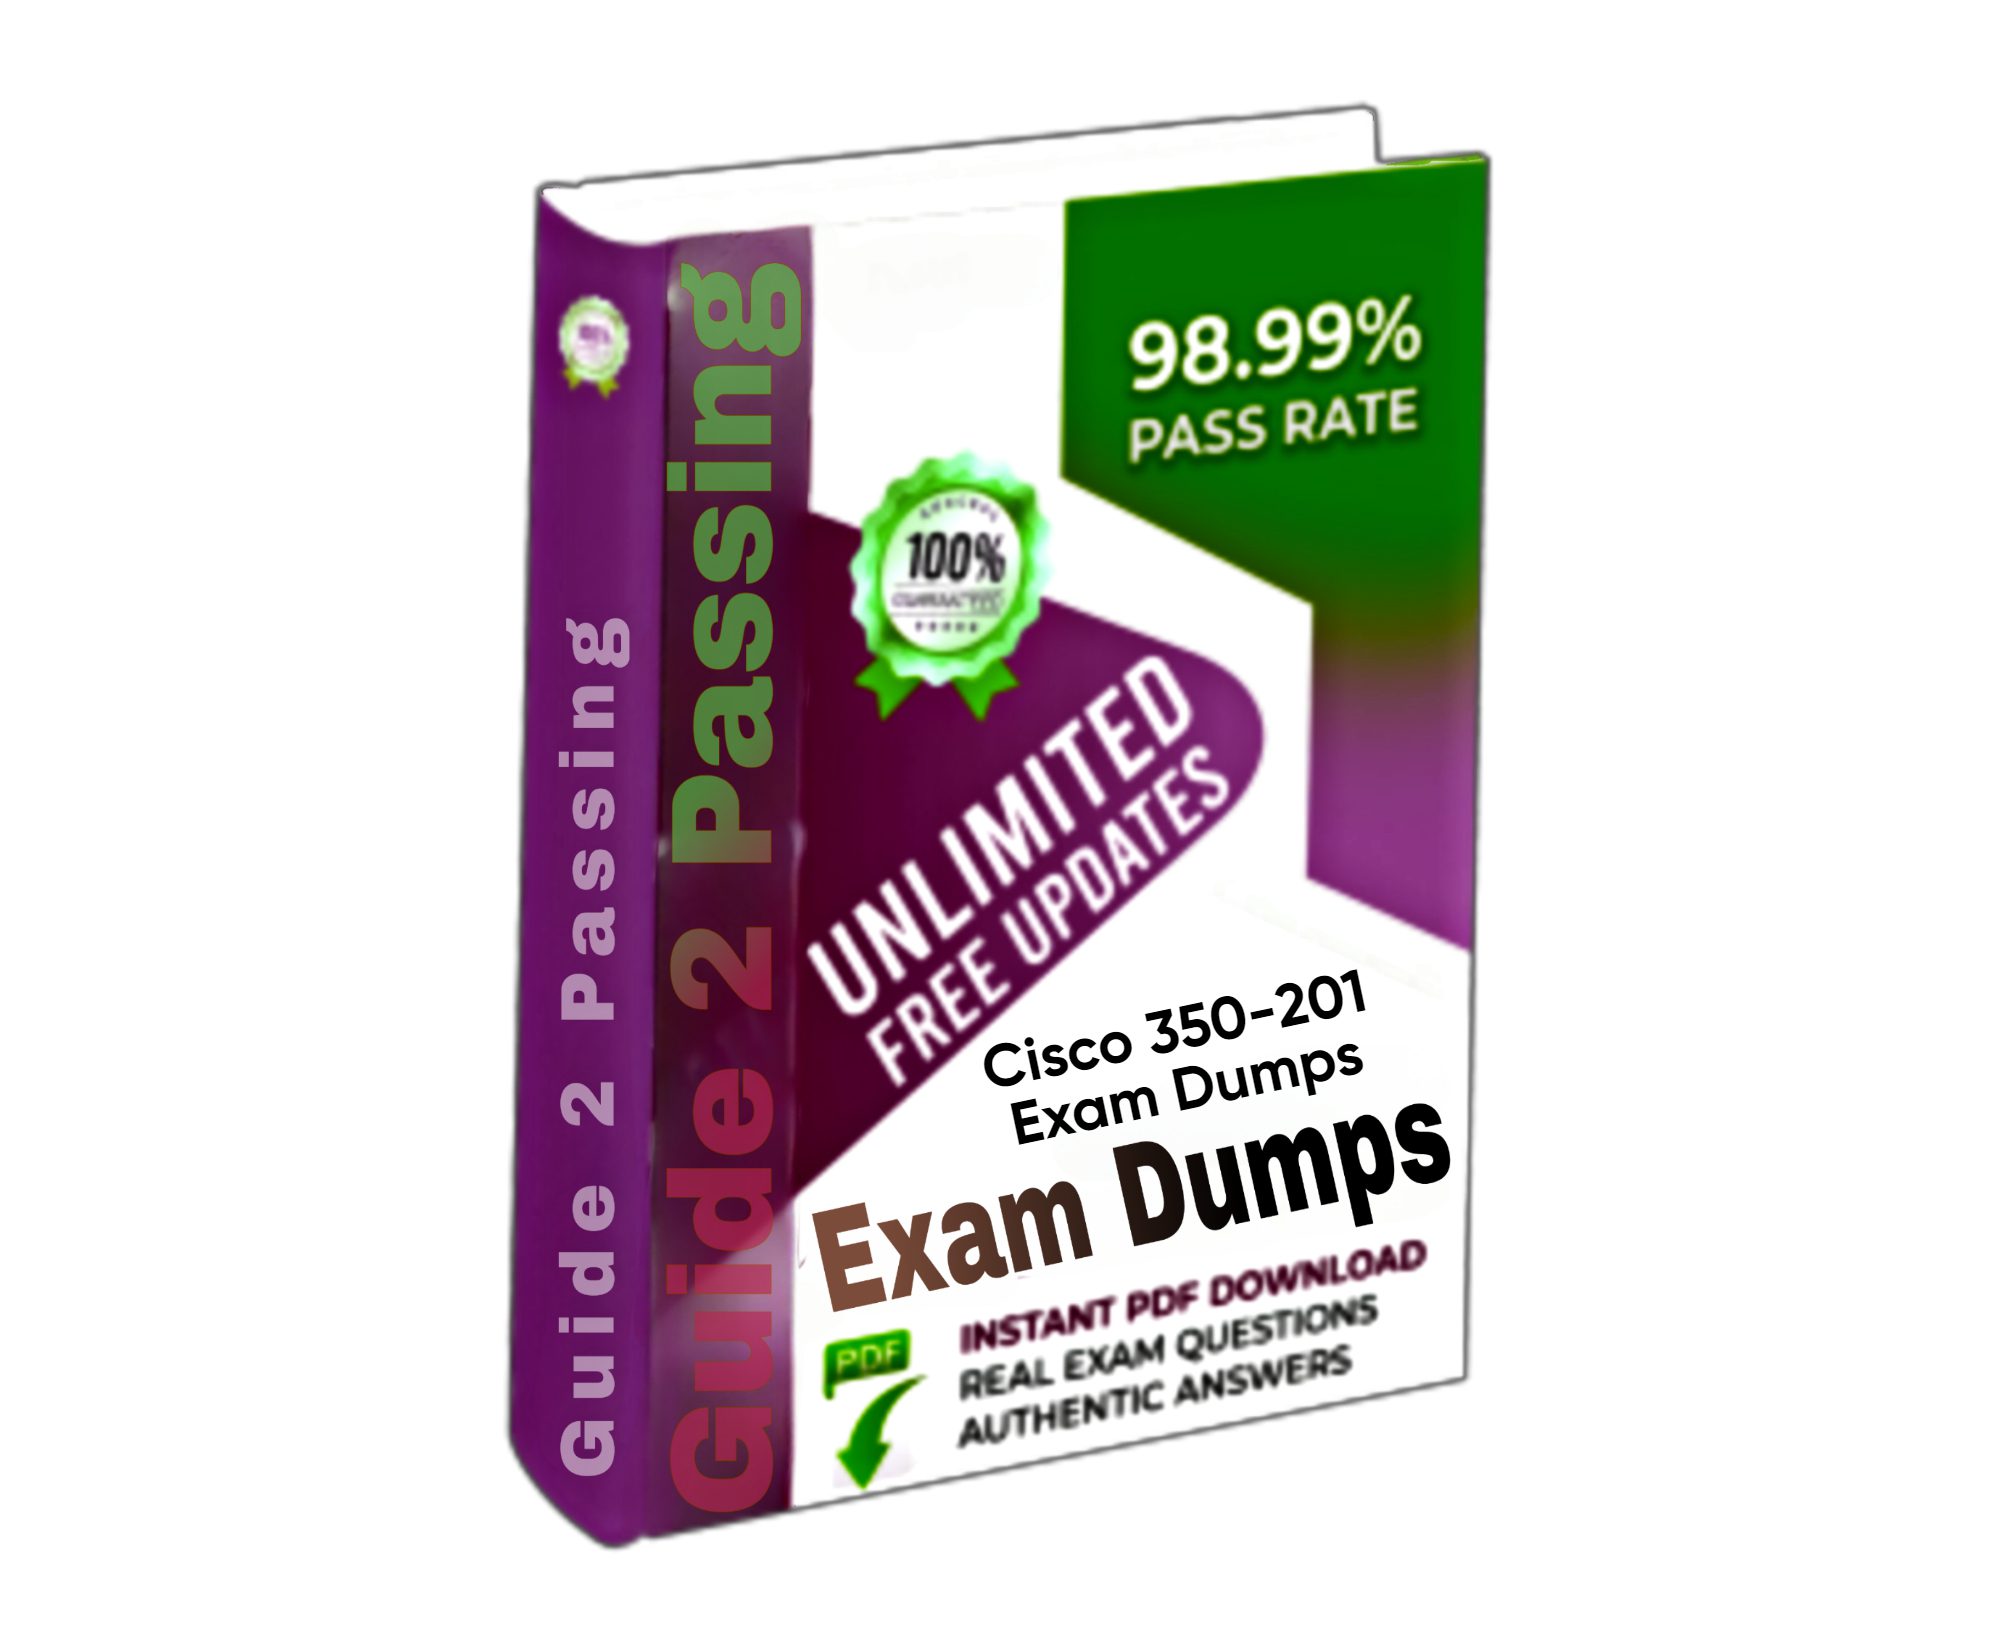 Pass Your Cisco 350-201 Exam Dumps From Guide 2 Passing